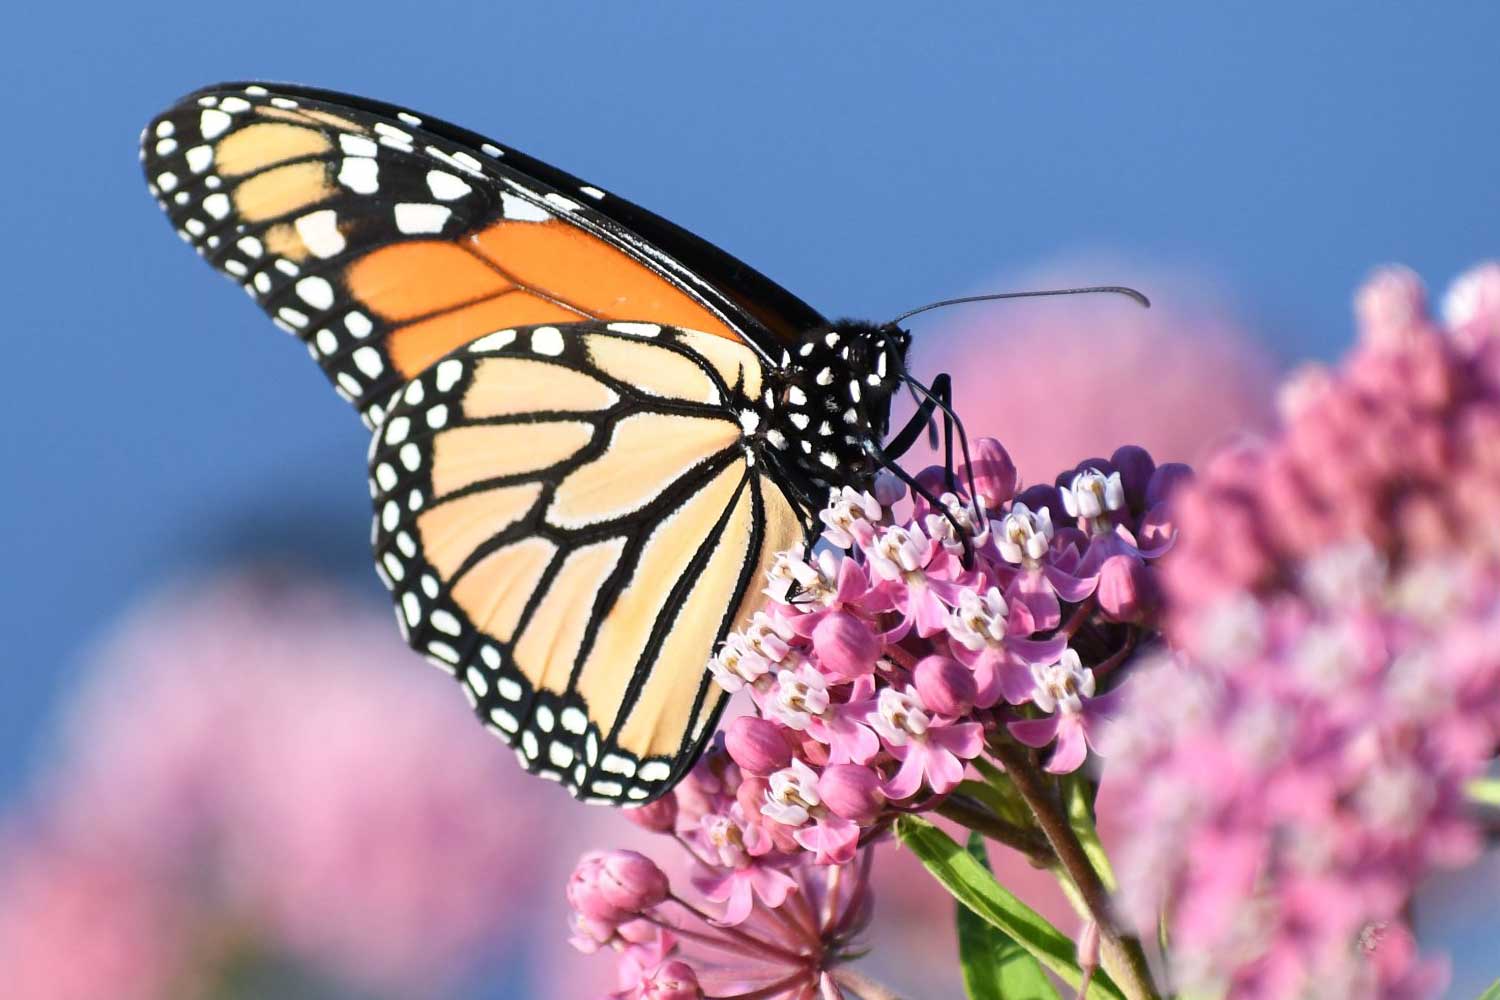 Monarch butterfly perched on flower blooms.